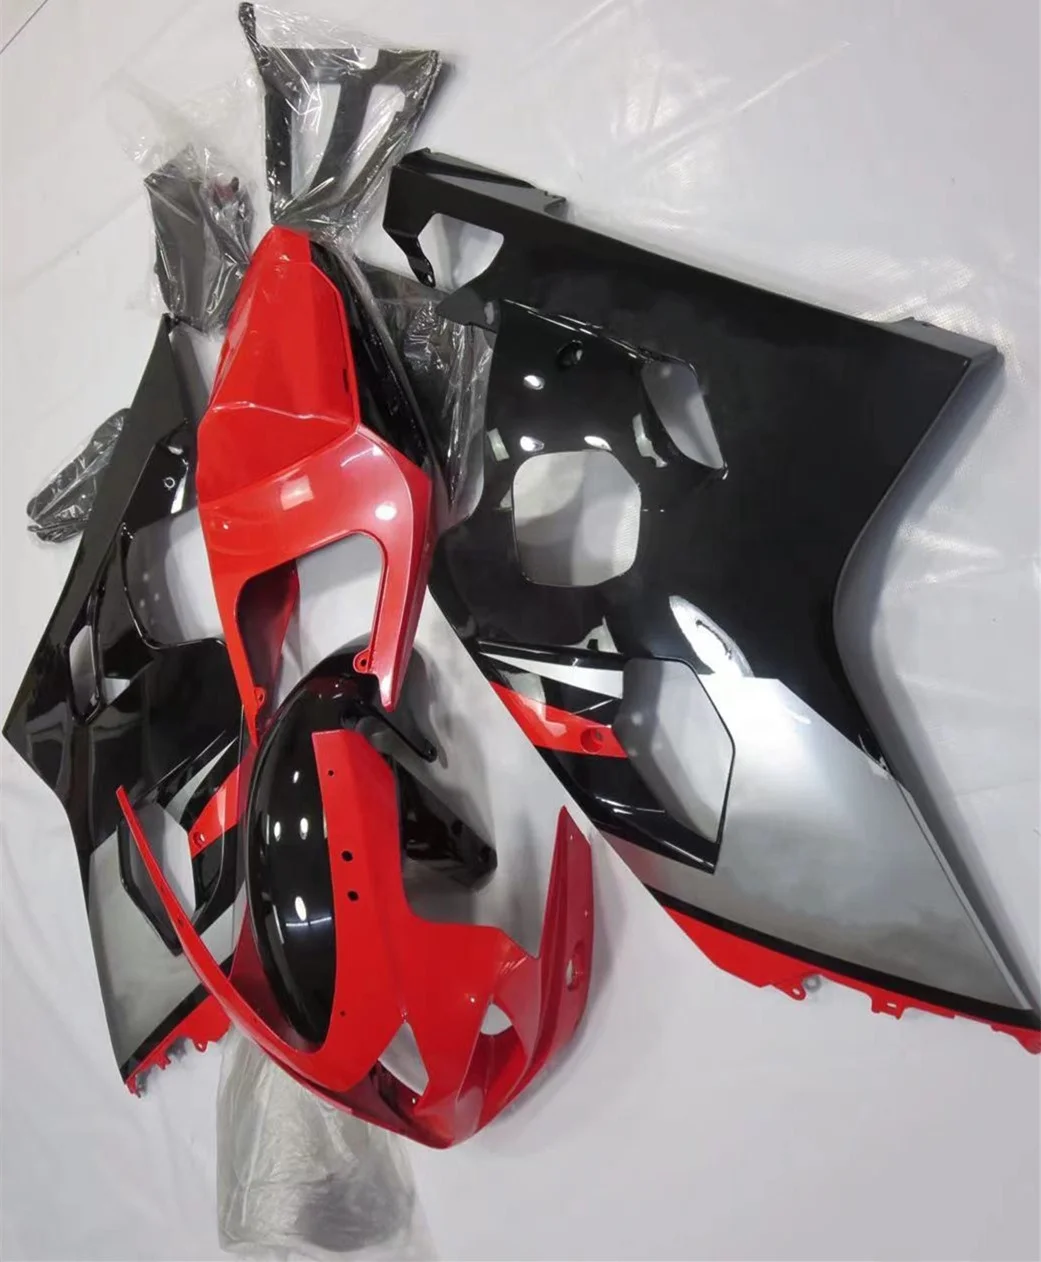 

2022 WHSC Motorcycle Accessories Kit For SUZUKI GSXR600-750 2004-2005 ABS Plastic Body Kits, Pictures shown